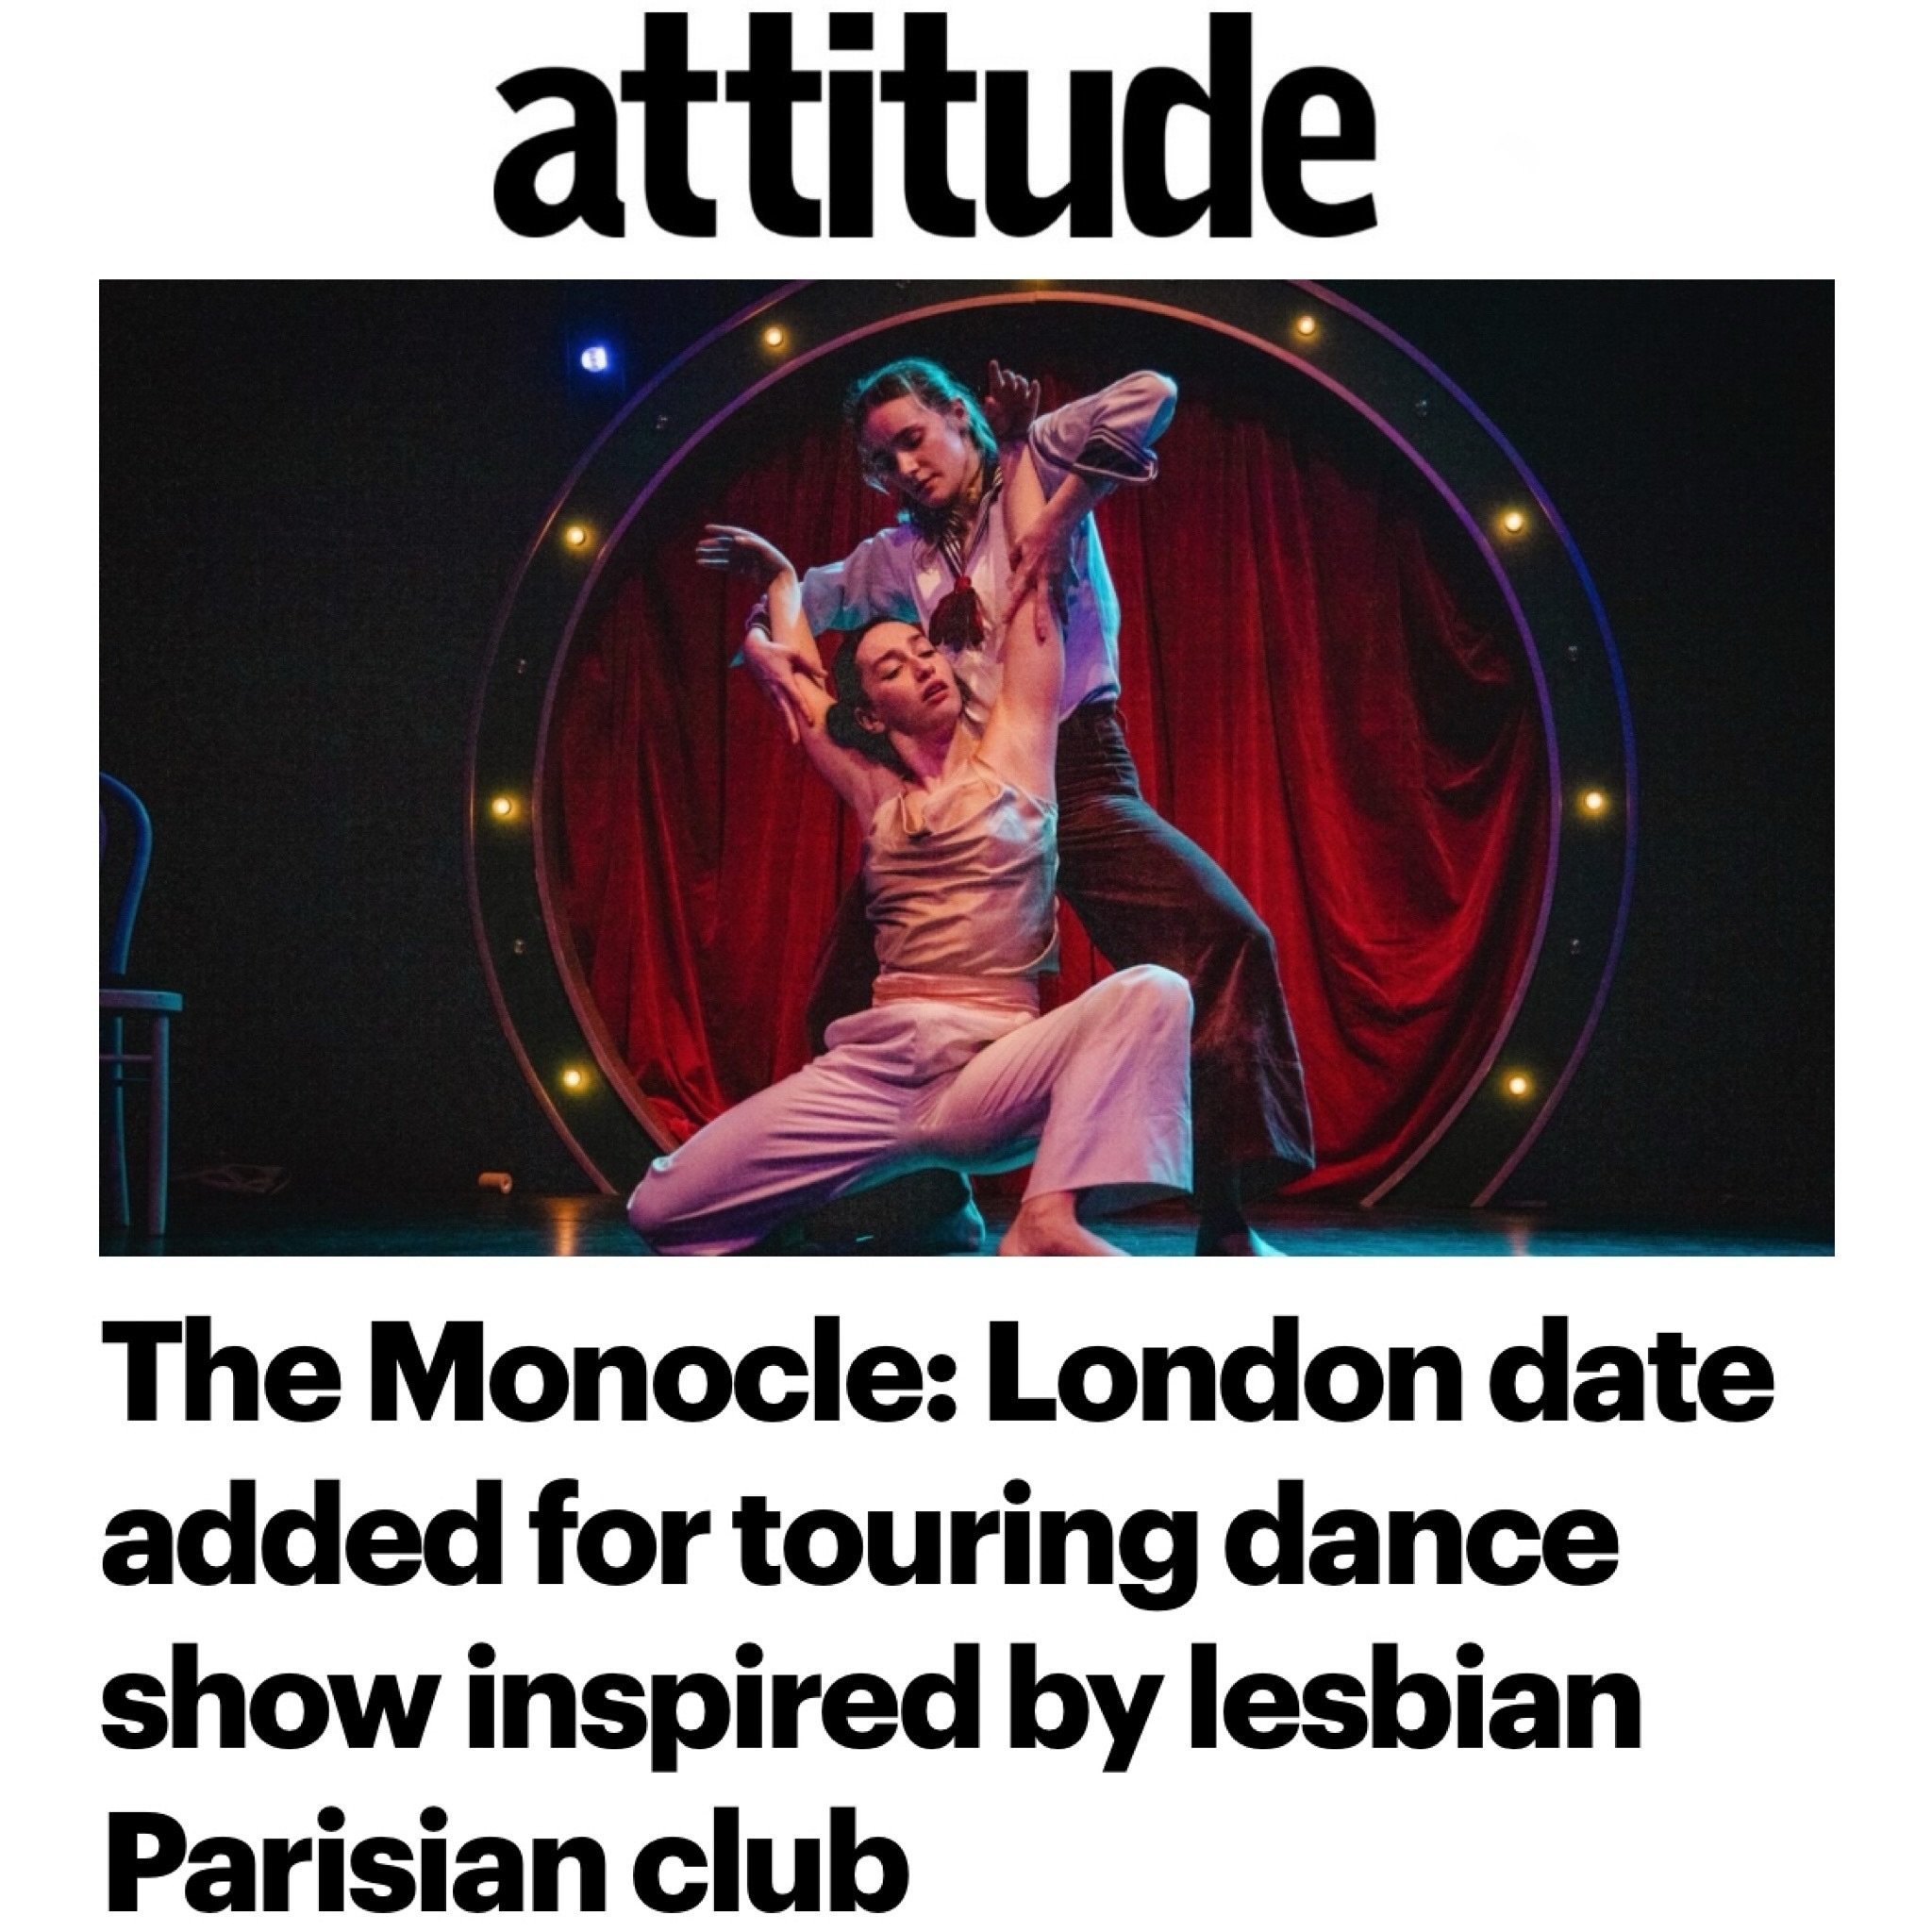 Next month @rdzvousdance&rsquo;s The Monocle comes to @wiltonsmusichall as part of an 11-venue UK tour. Bringing the spirit of the notorious 1930&rsquo;s Parisian lesbian club to the theatre, this show advocates for the importance of safe spaces for 